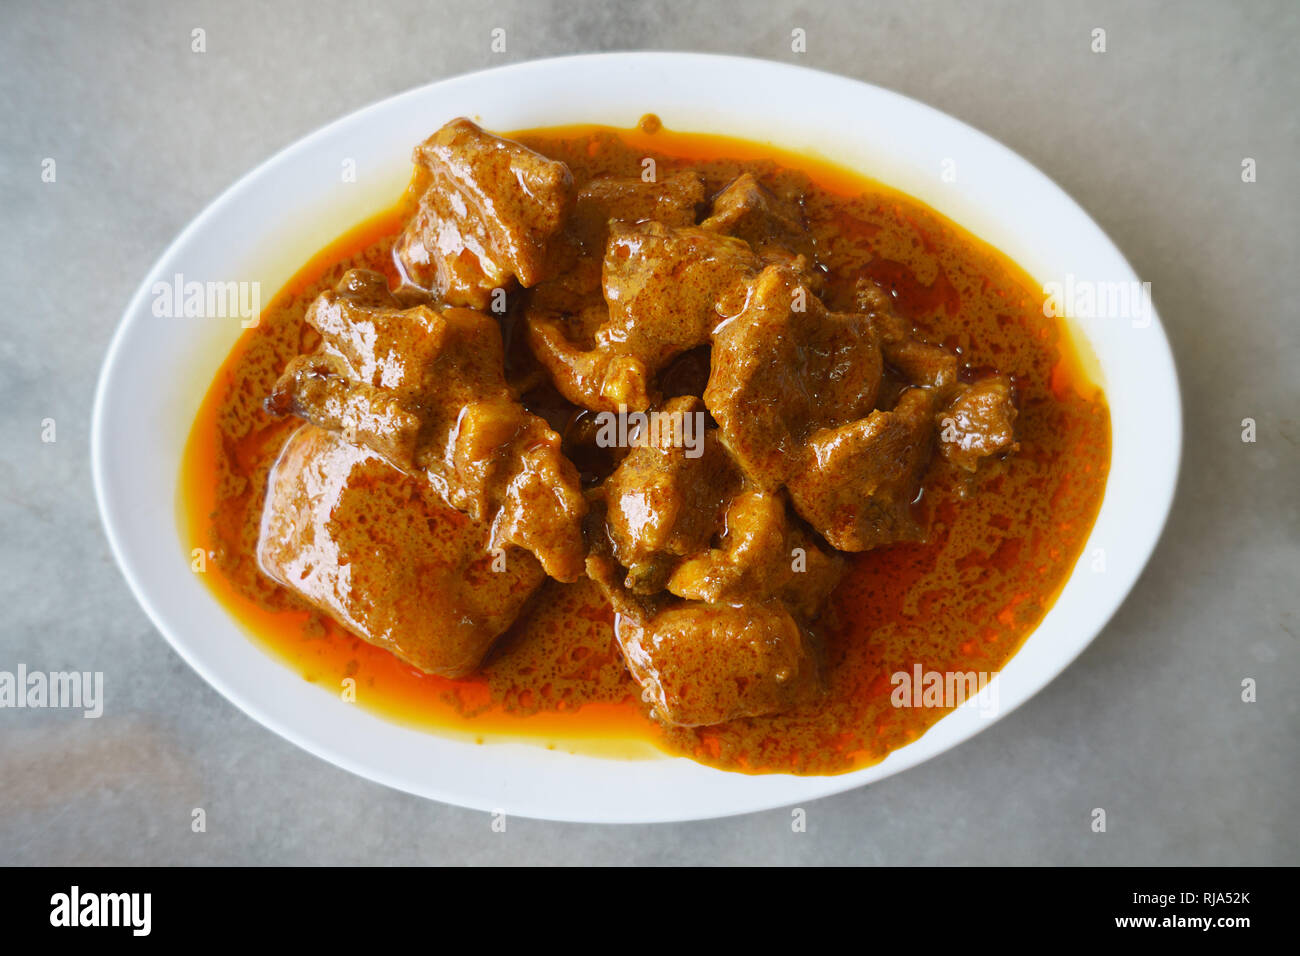 Malaysian street food a delicious Indian mutton curry on table setup. Stock Photo